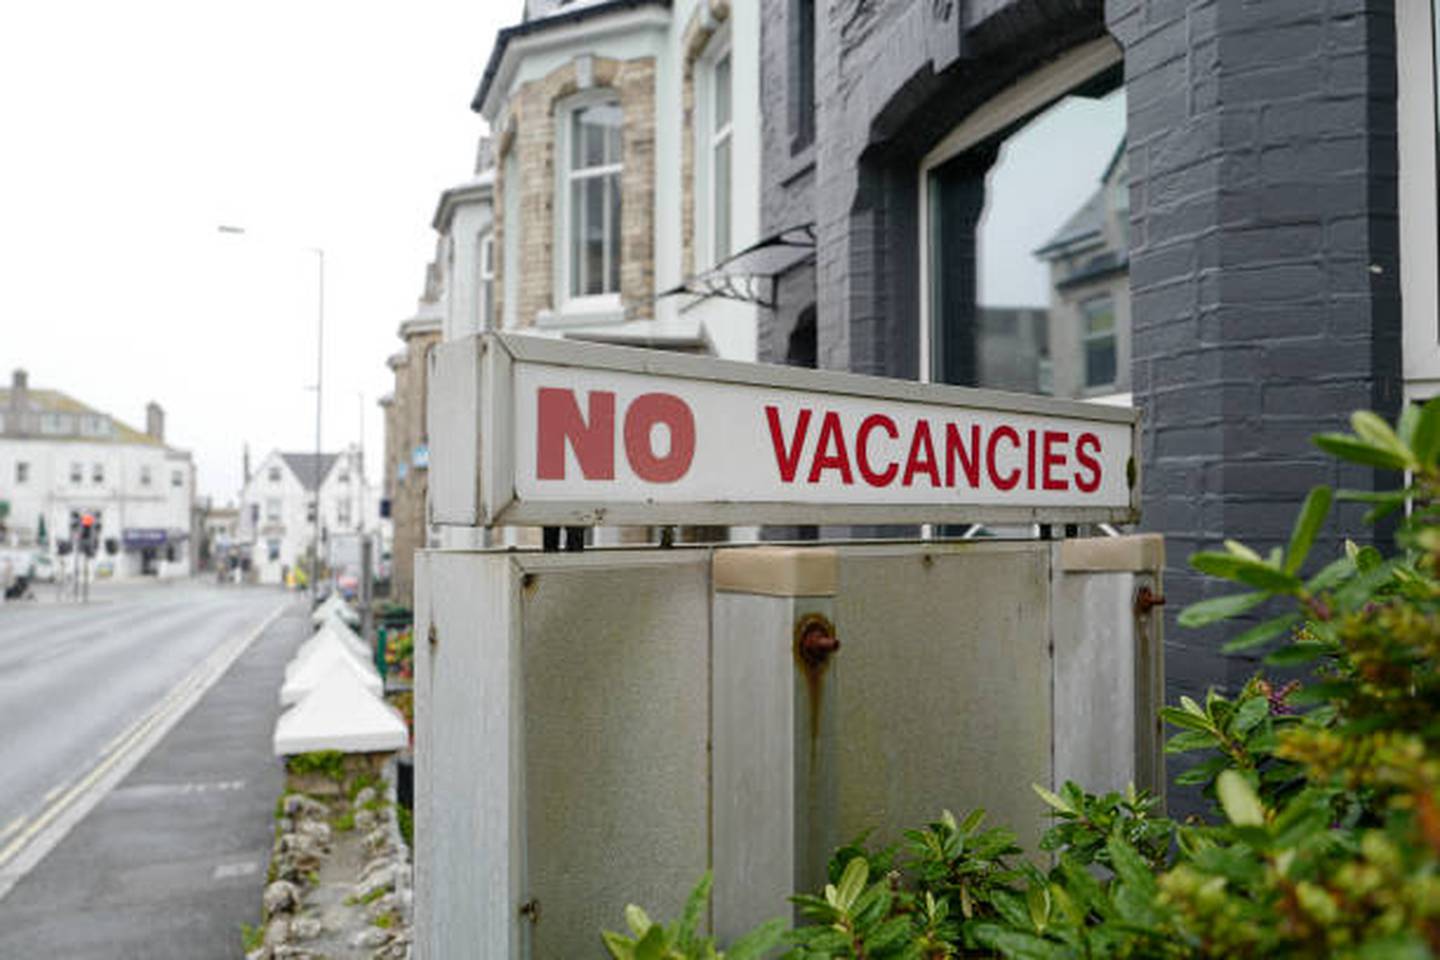 A bed and breakfast displays a No Vacancies sign – an indication of the area's increasing popularity as lockdown orders were lifted. Getty Images